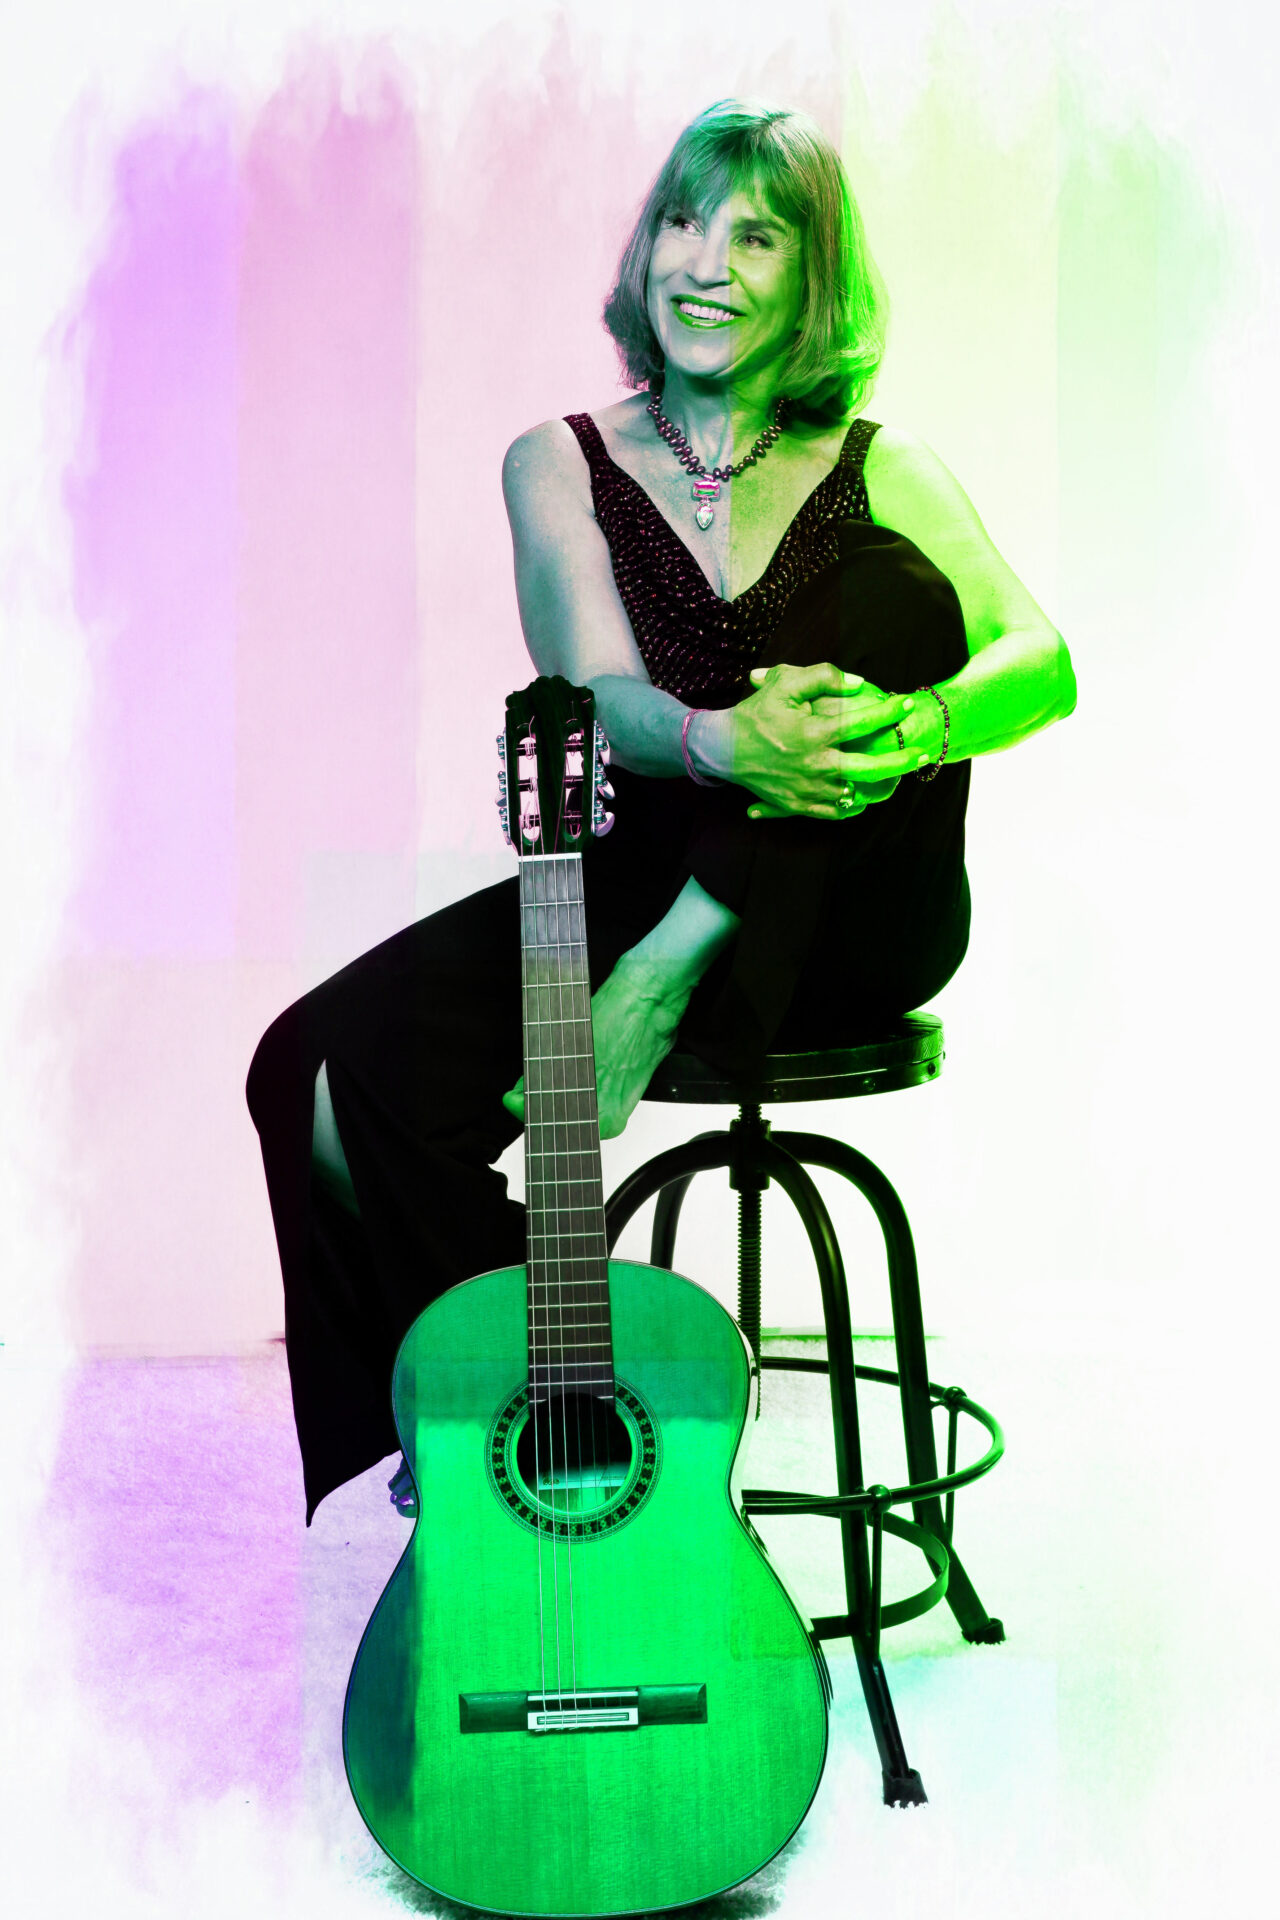 A woman sitting on a stool with a green acoustic guitar.